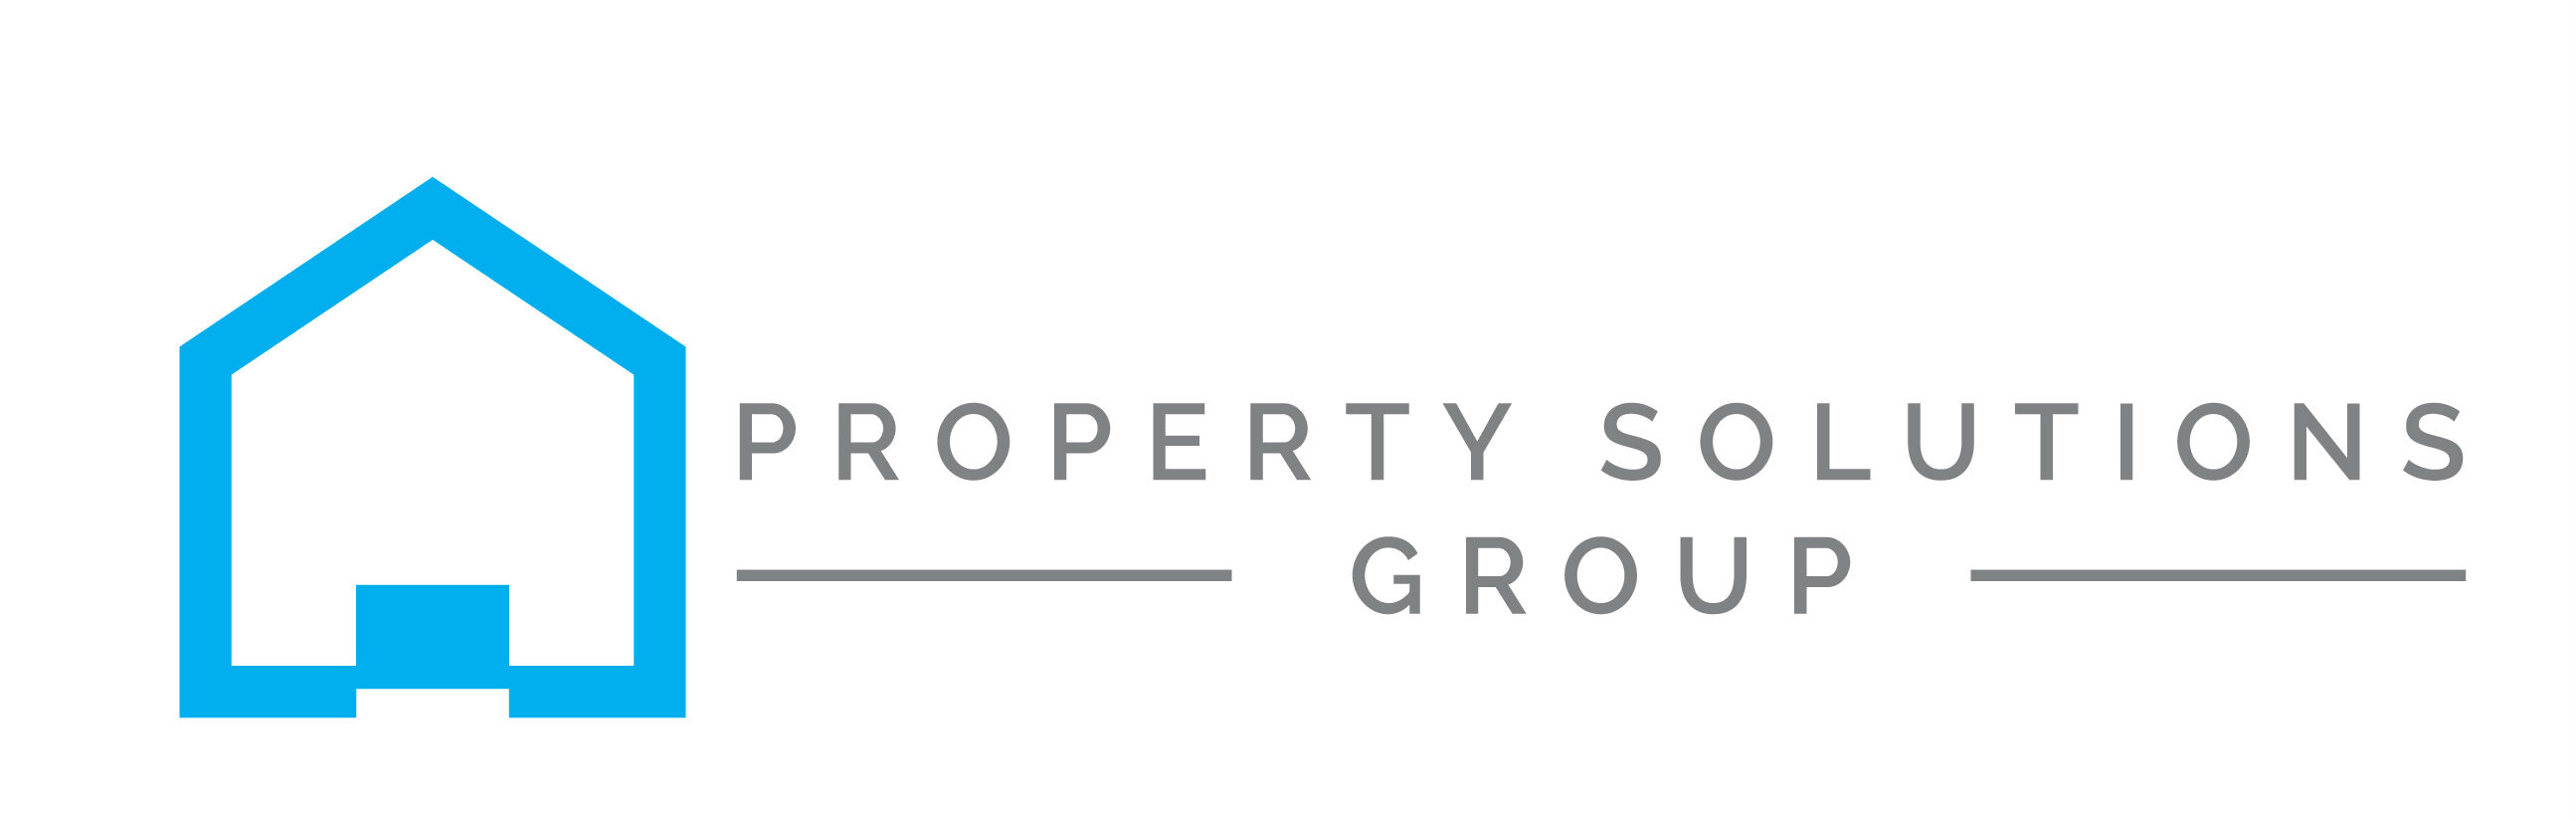 Property Solutions Group